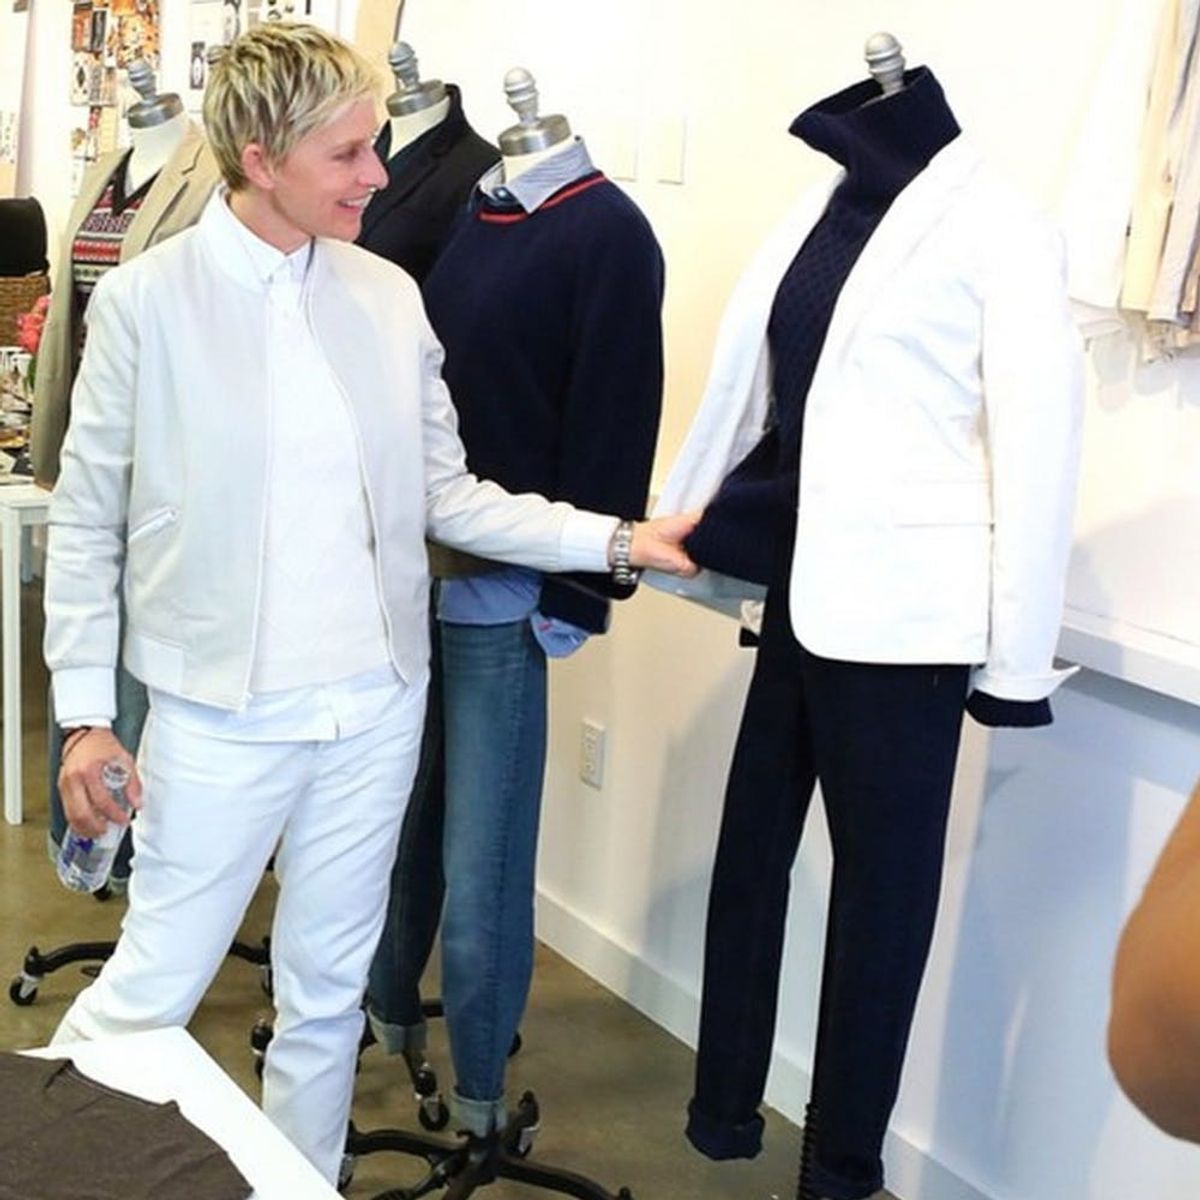 Get a First Look at Everything You’ll Want to Buy from Ellen DeGeneres’ New Lifestyle Site